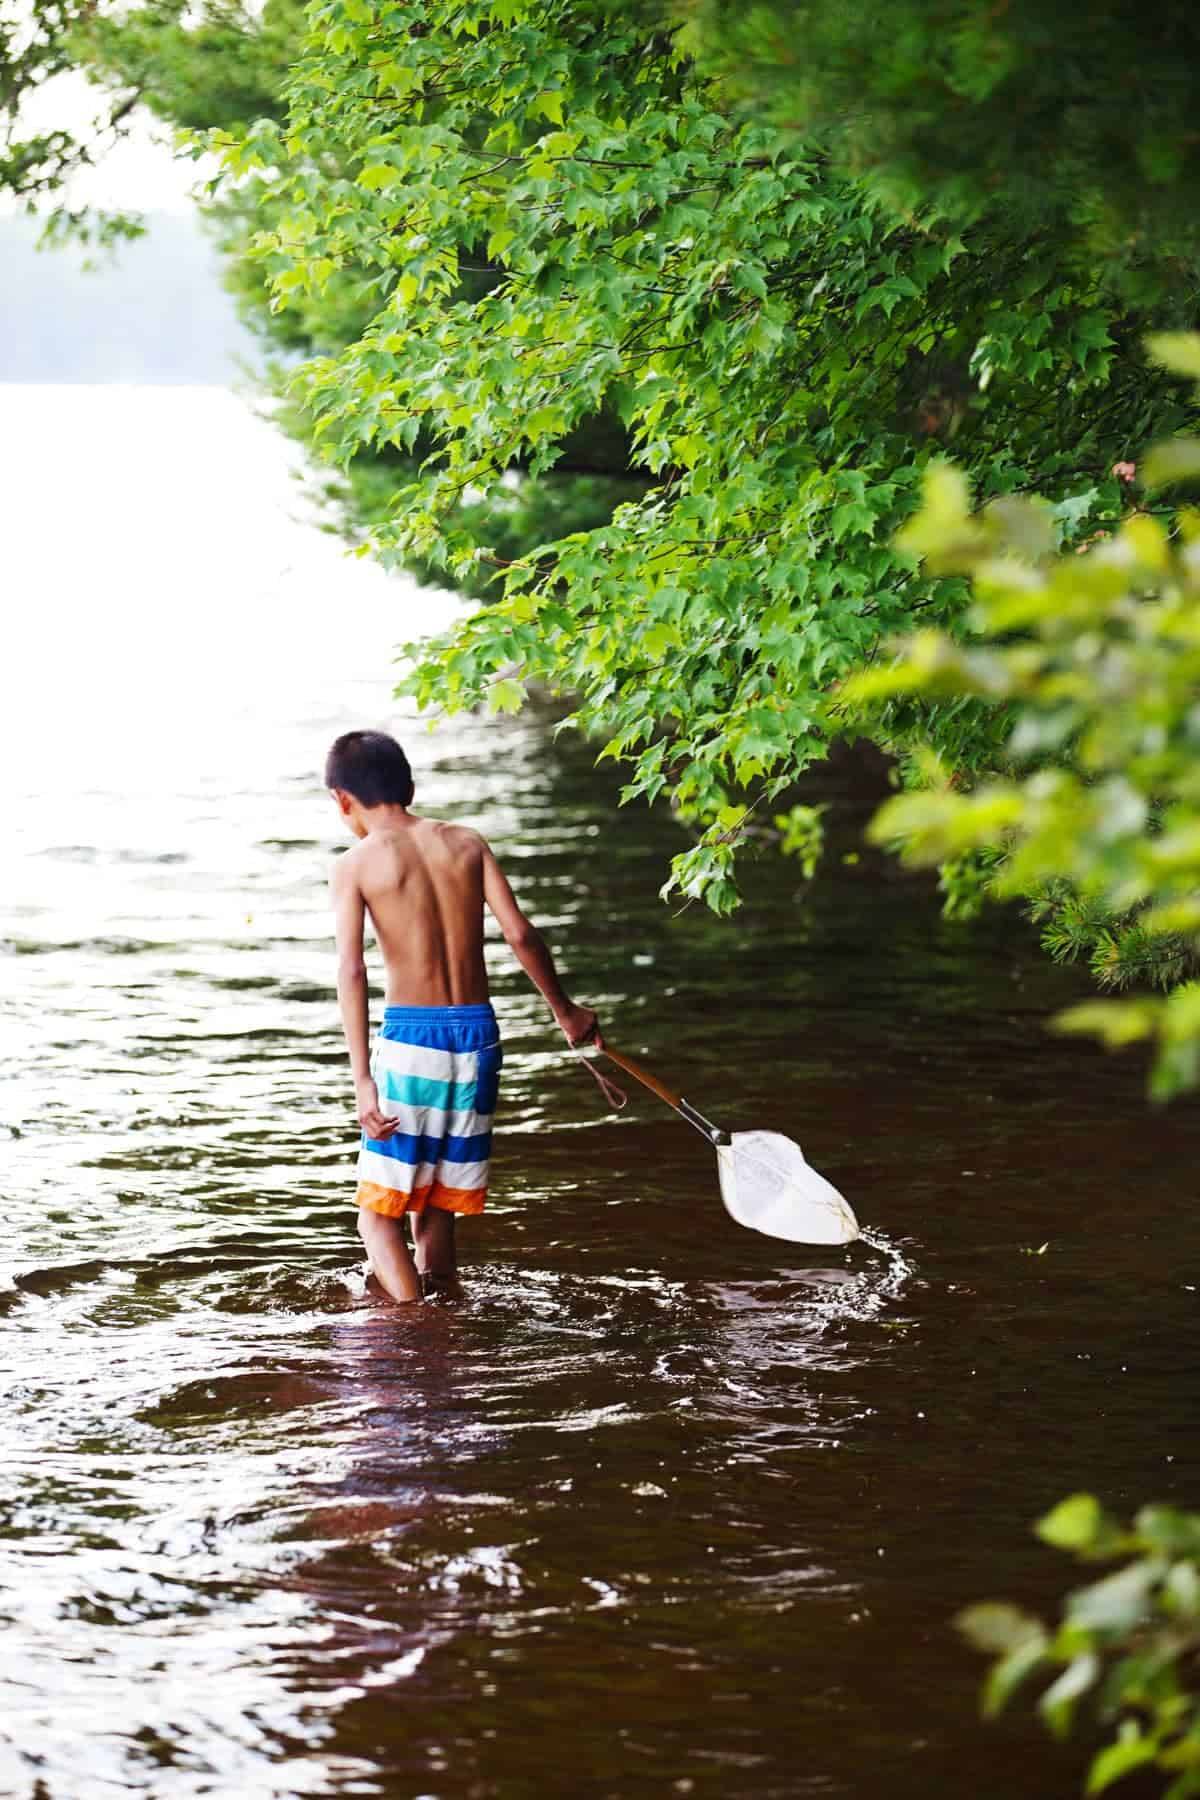 Young boy with a fishing net in a lake.